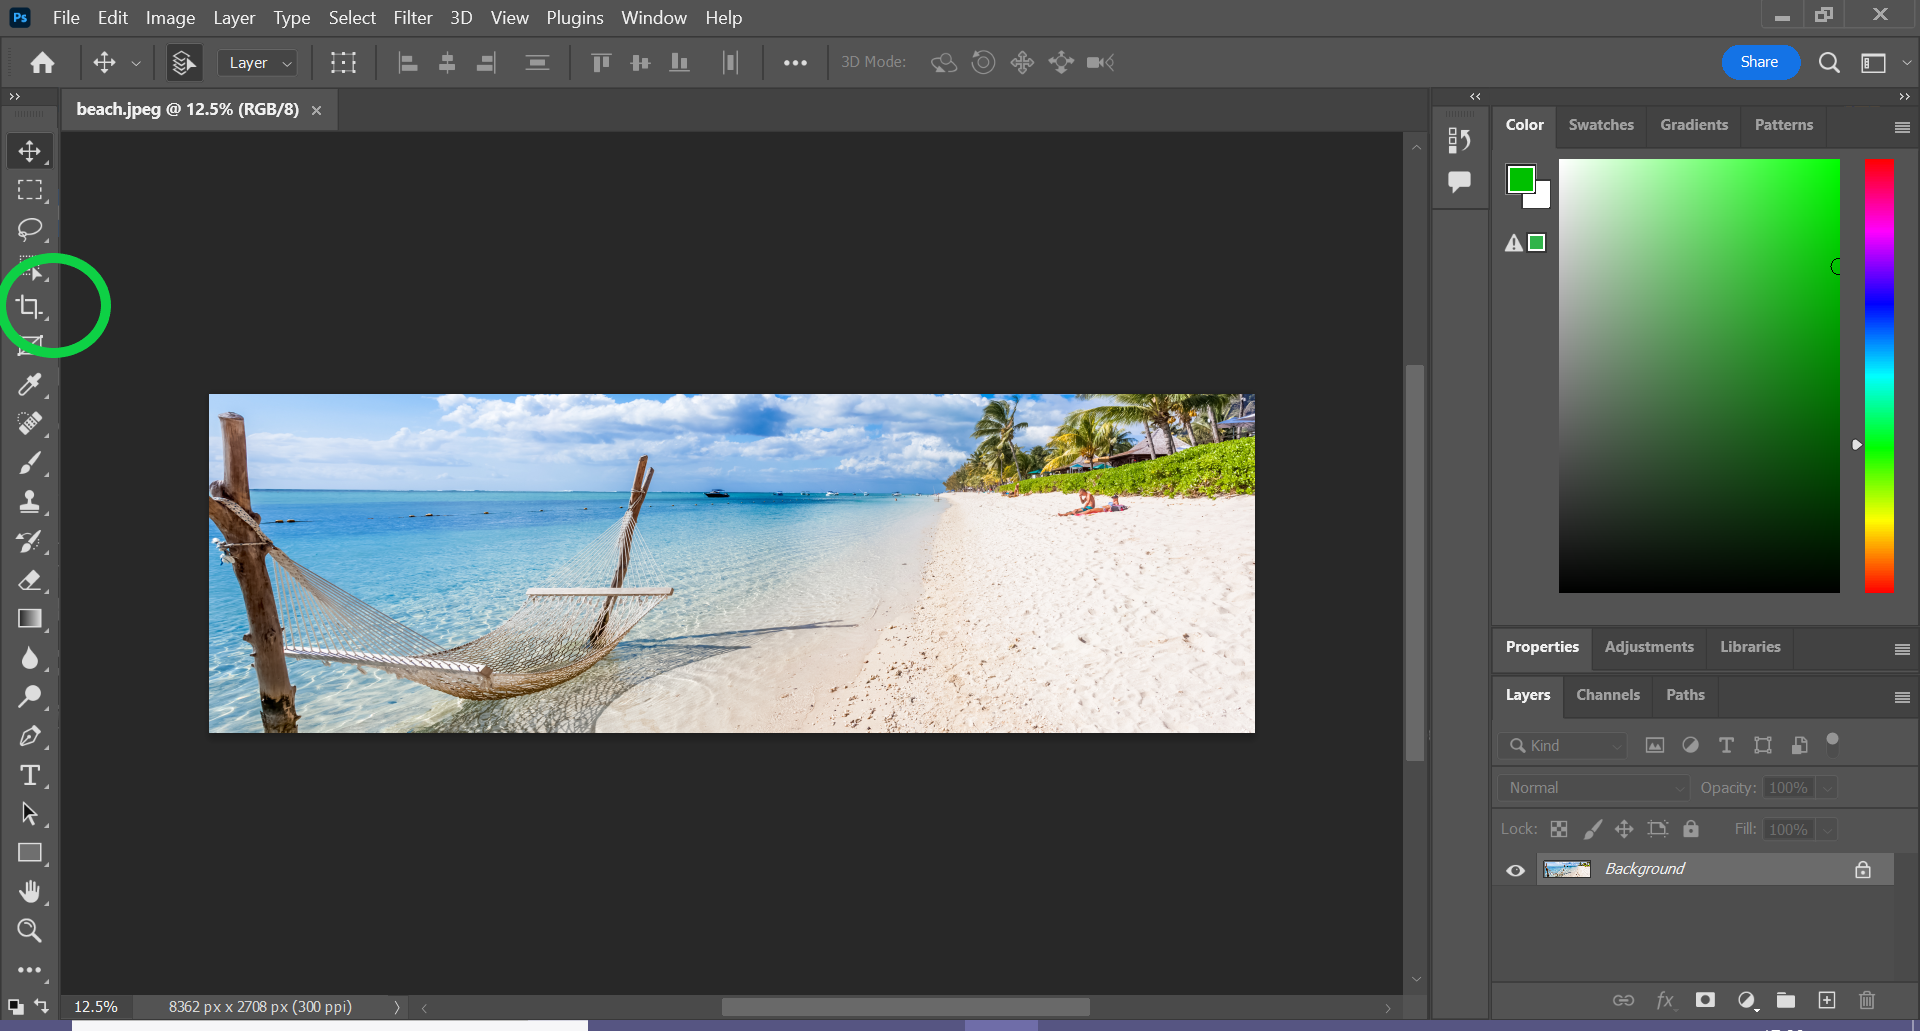 How to crop in Photoshop